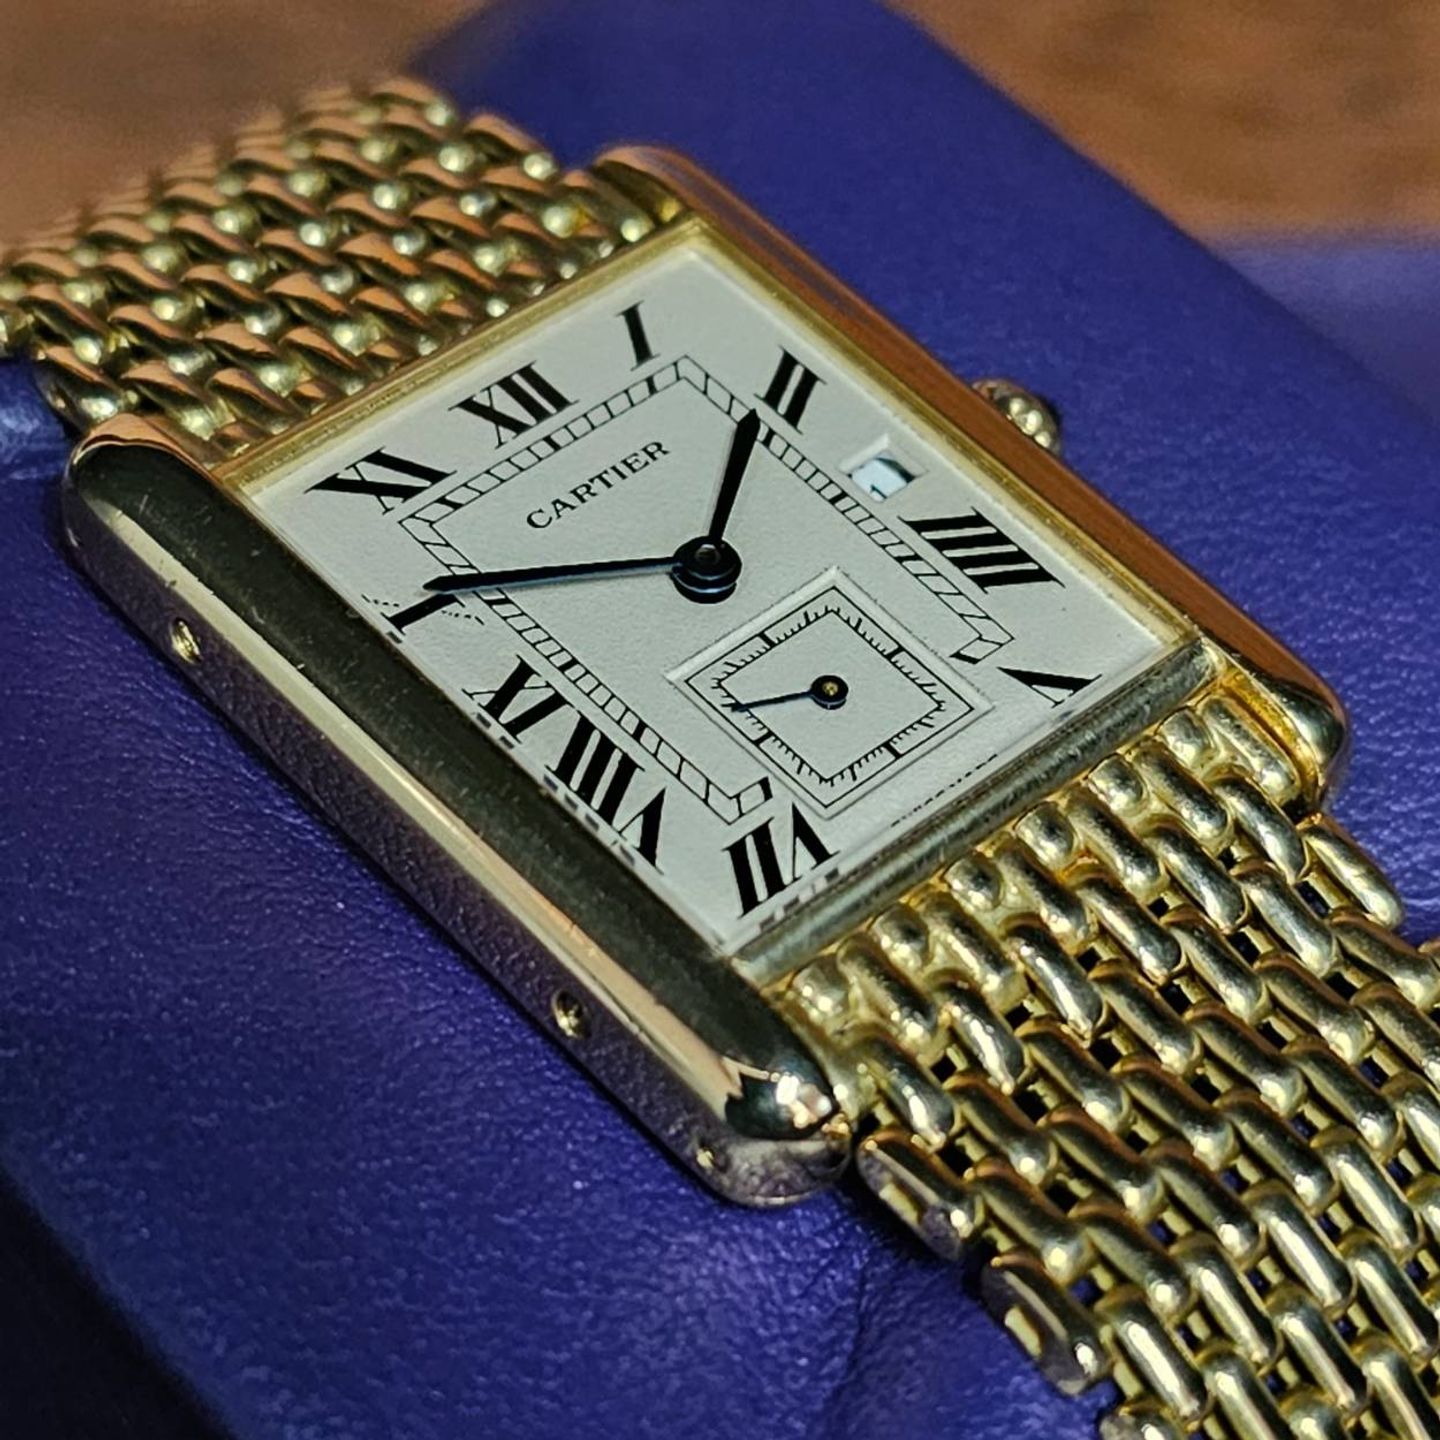 Cartier Tank Louis Cartier 8110 (Unknown (random serial)) - White dial 31 mm Yellow Gold case (1/5)